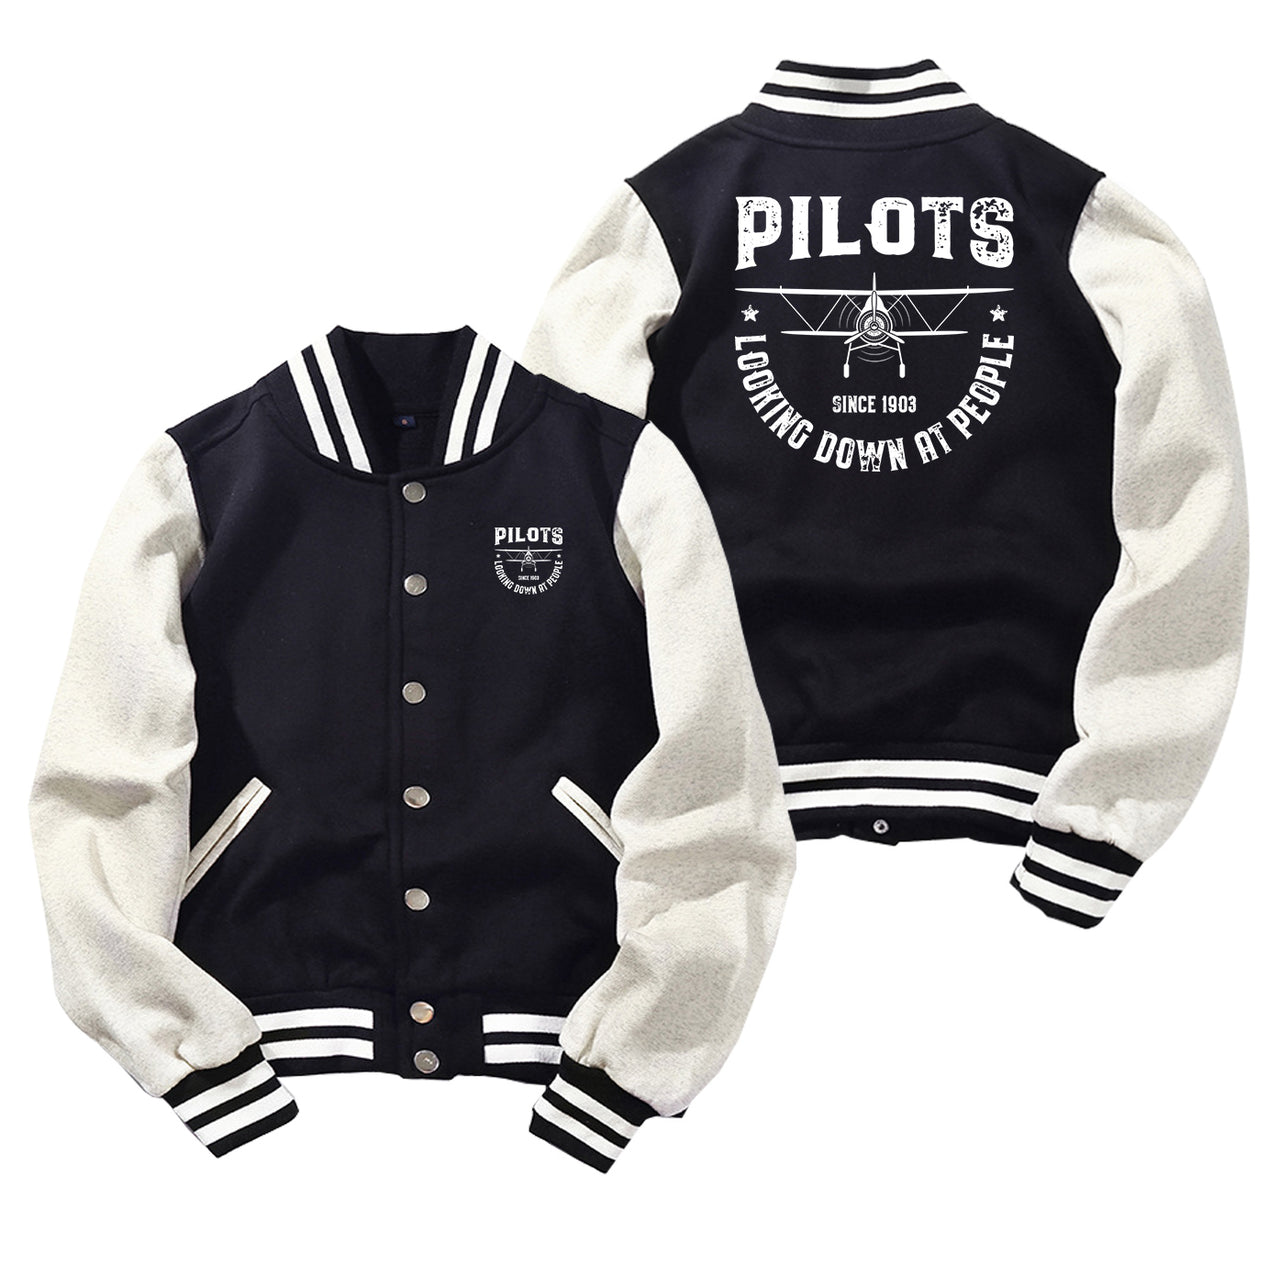 Pilots Looking Down at People Since 1903 Designed Baseball Style Jackets